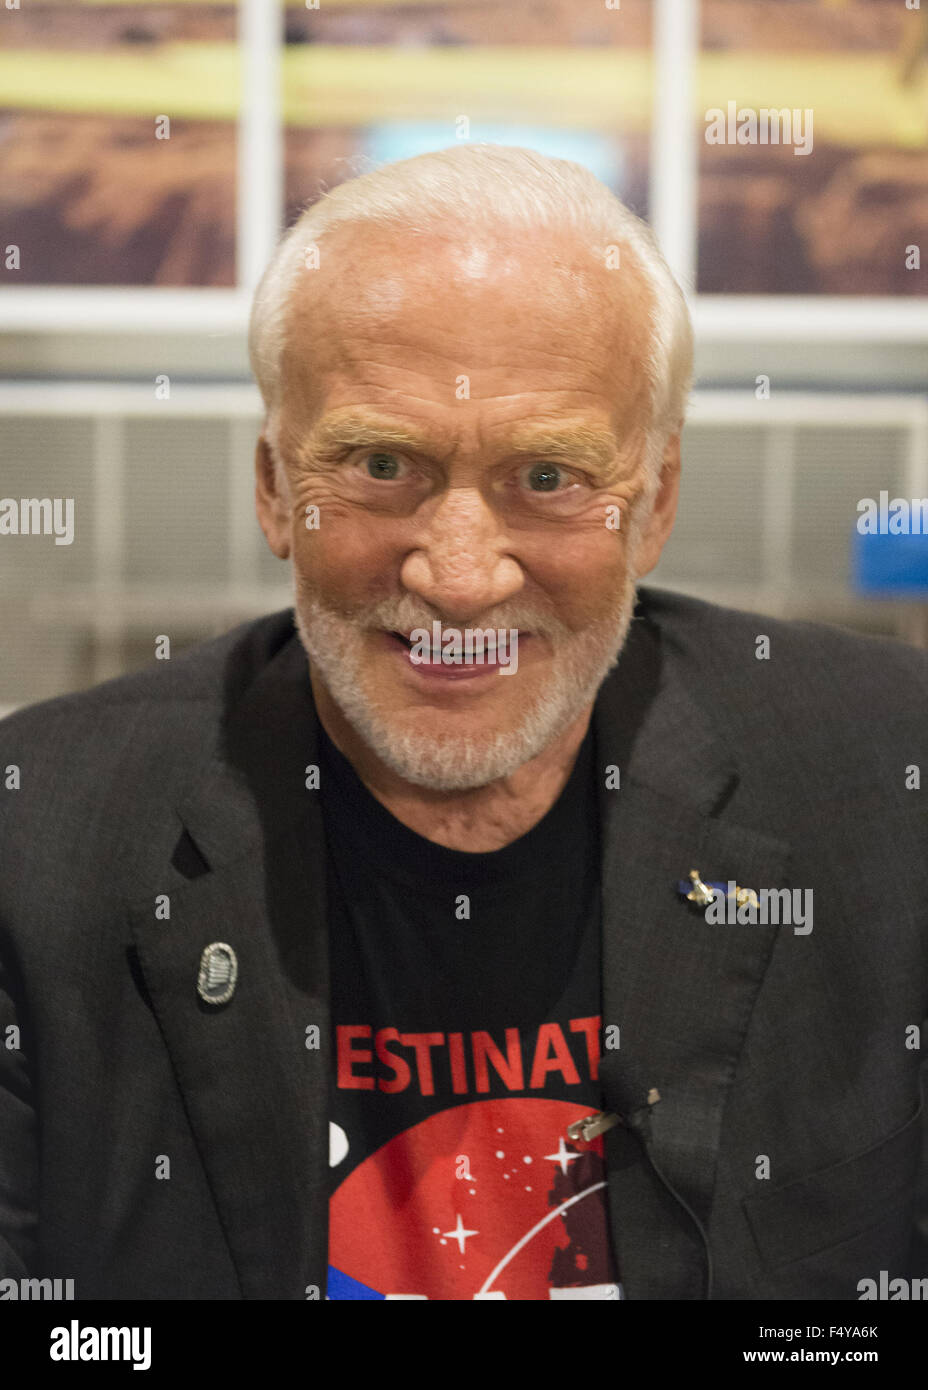 Garden City, New York, USA. 23rd Oct, 2015. Former NASA astronaut Edwin BUZZ ALDRIN discusses his experiences and signs copies of his new Children's Middle Grade book Welcome to Mars: Making a Home on the Red Planet, at Long Island's Cradle of Aviation Museum. Aldrin is wearing his Destination MARS shirt. On the 1969 Apollo 11 mission, Buzz Aldrin was the second person ever to walk on the Moon, and his first trip to space was the 1966 Gemini 12. © Ann Parry/ZUMA Wire/Alamy Live News Stock Photo